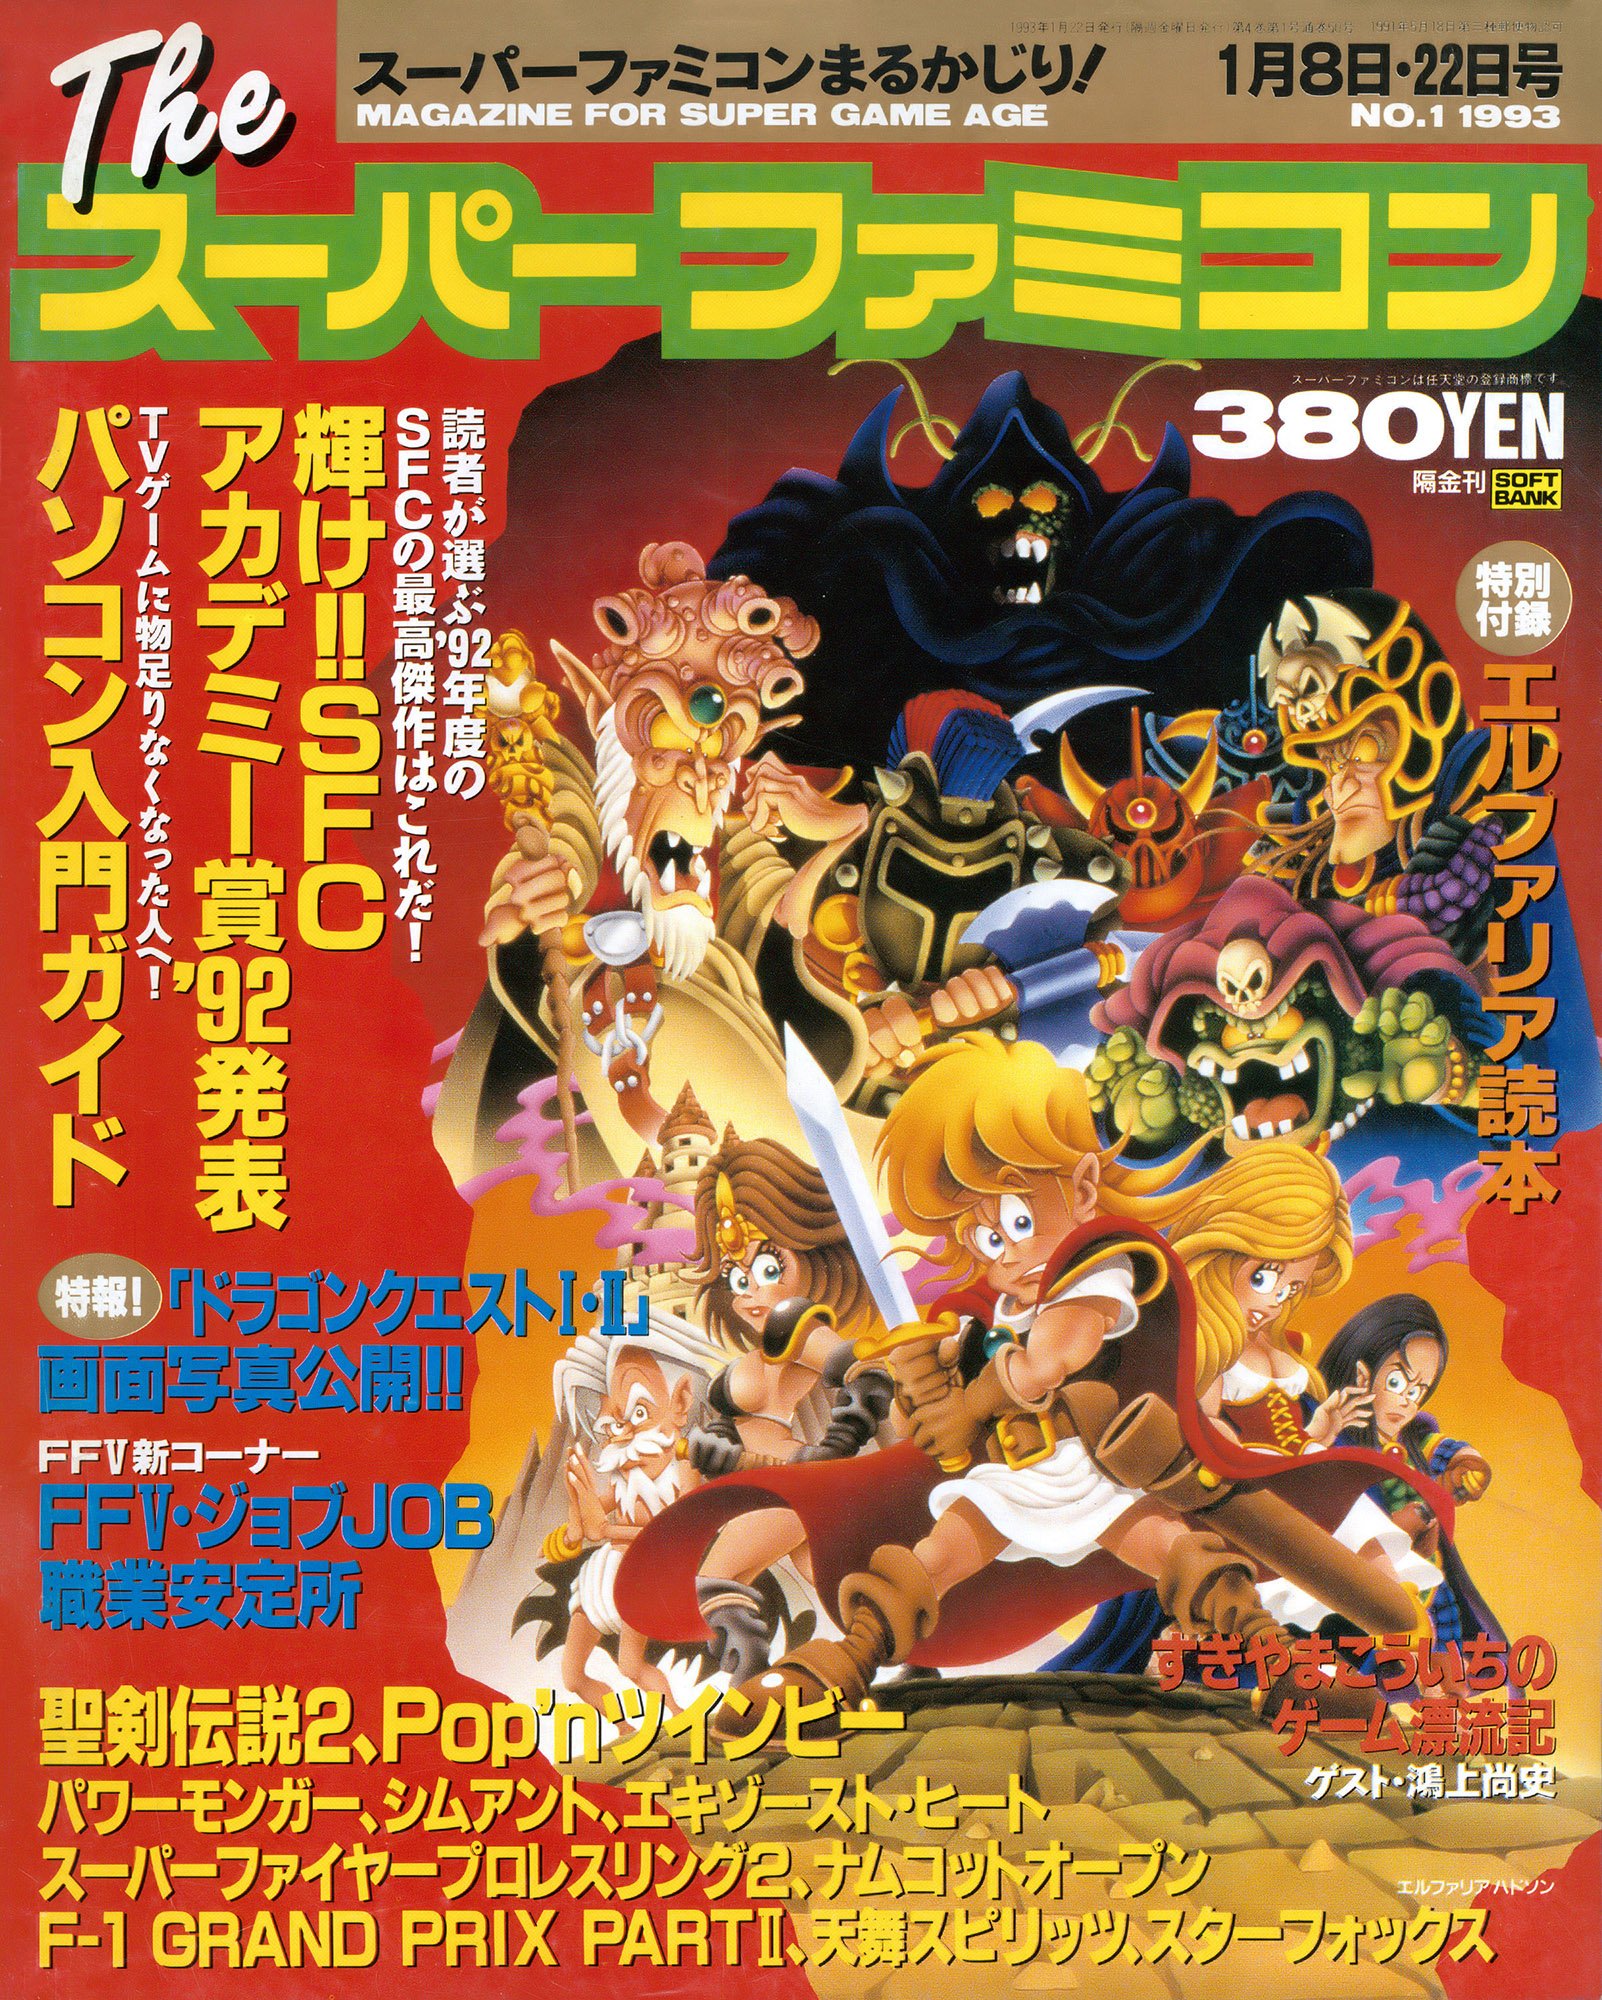 More information about "The Super Famicom Vol.4 No.01 (January 8/22, 1993)"